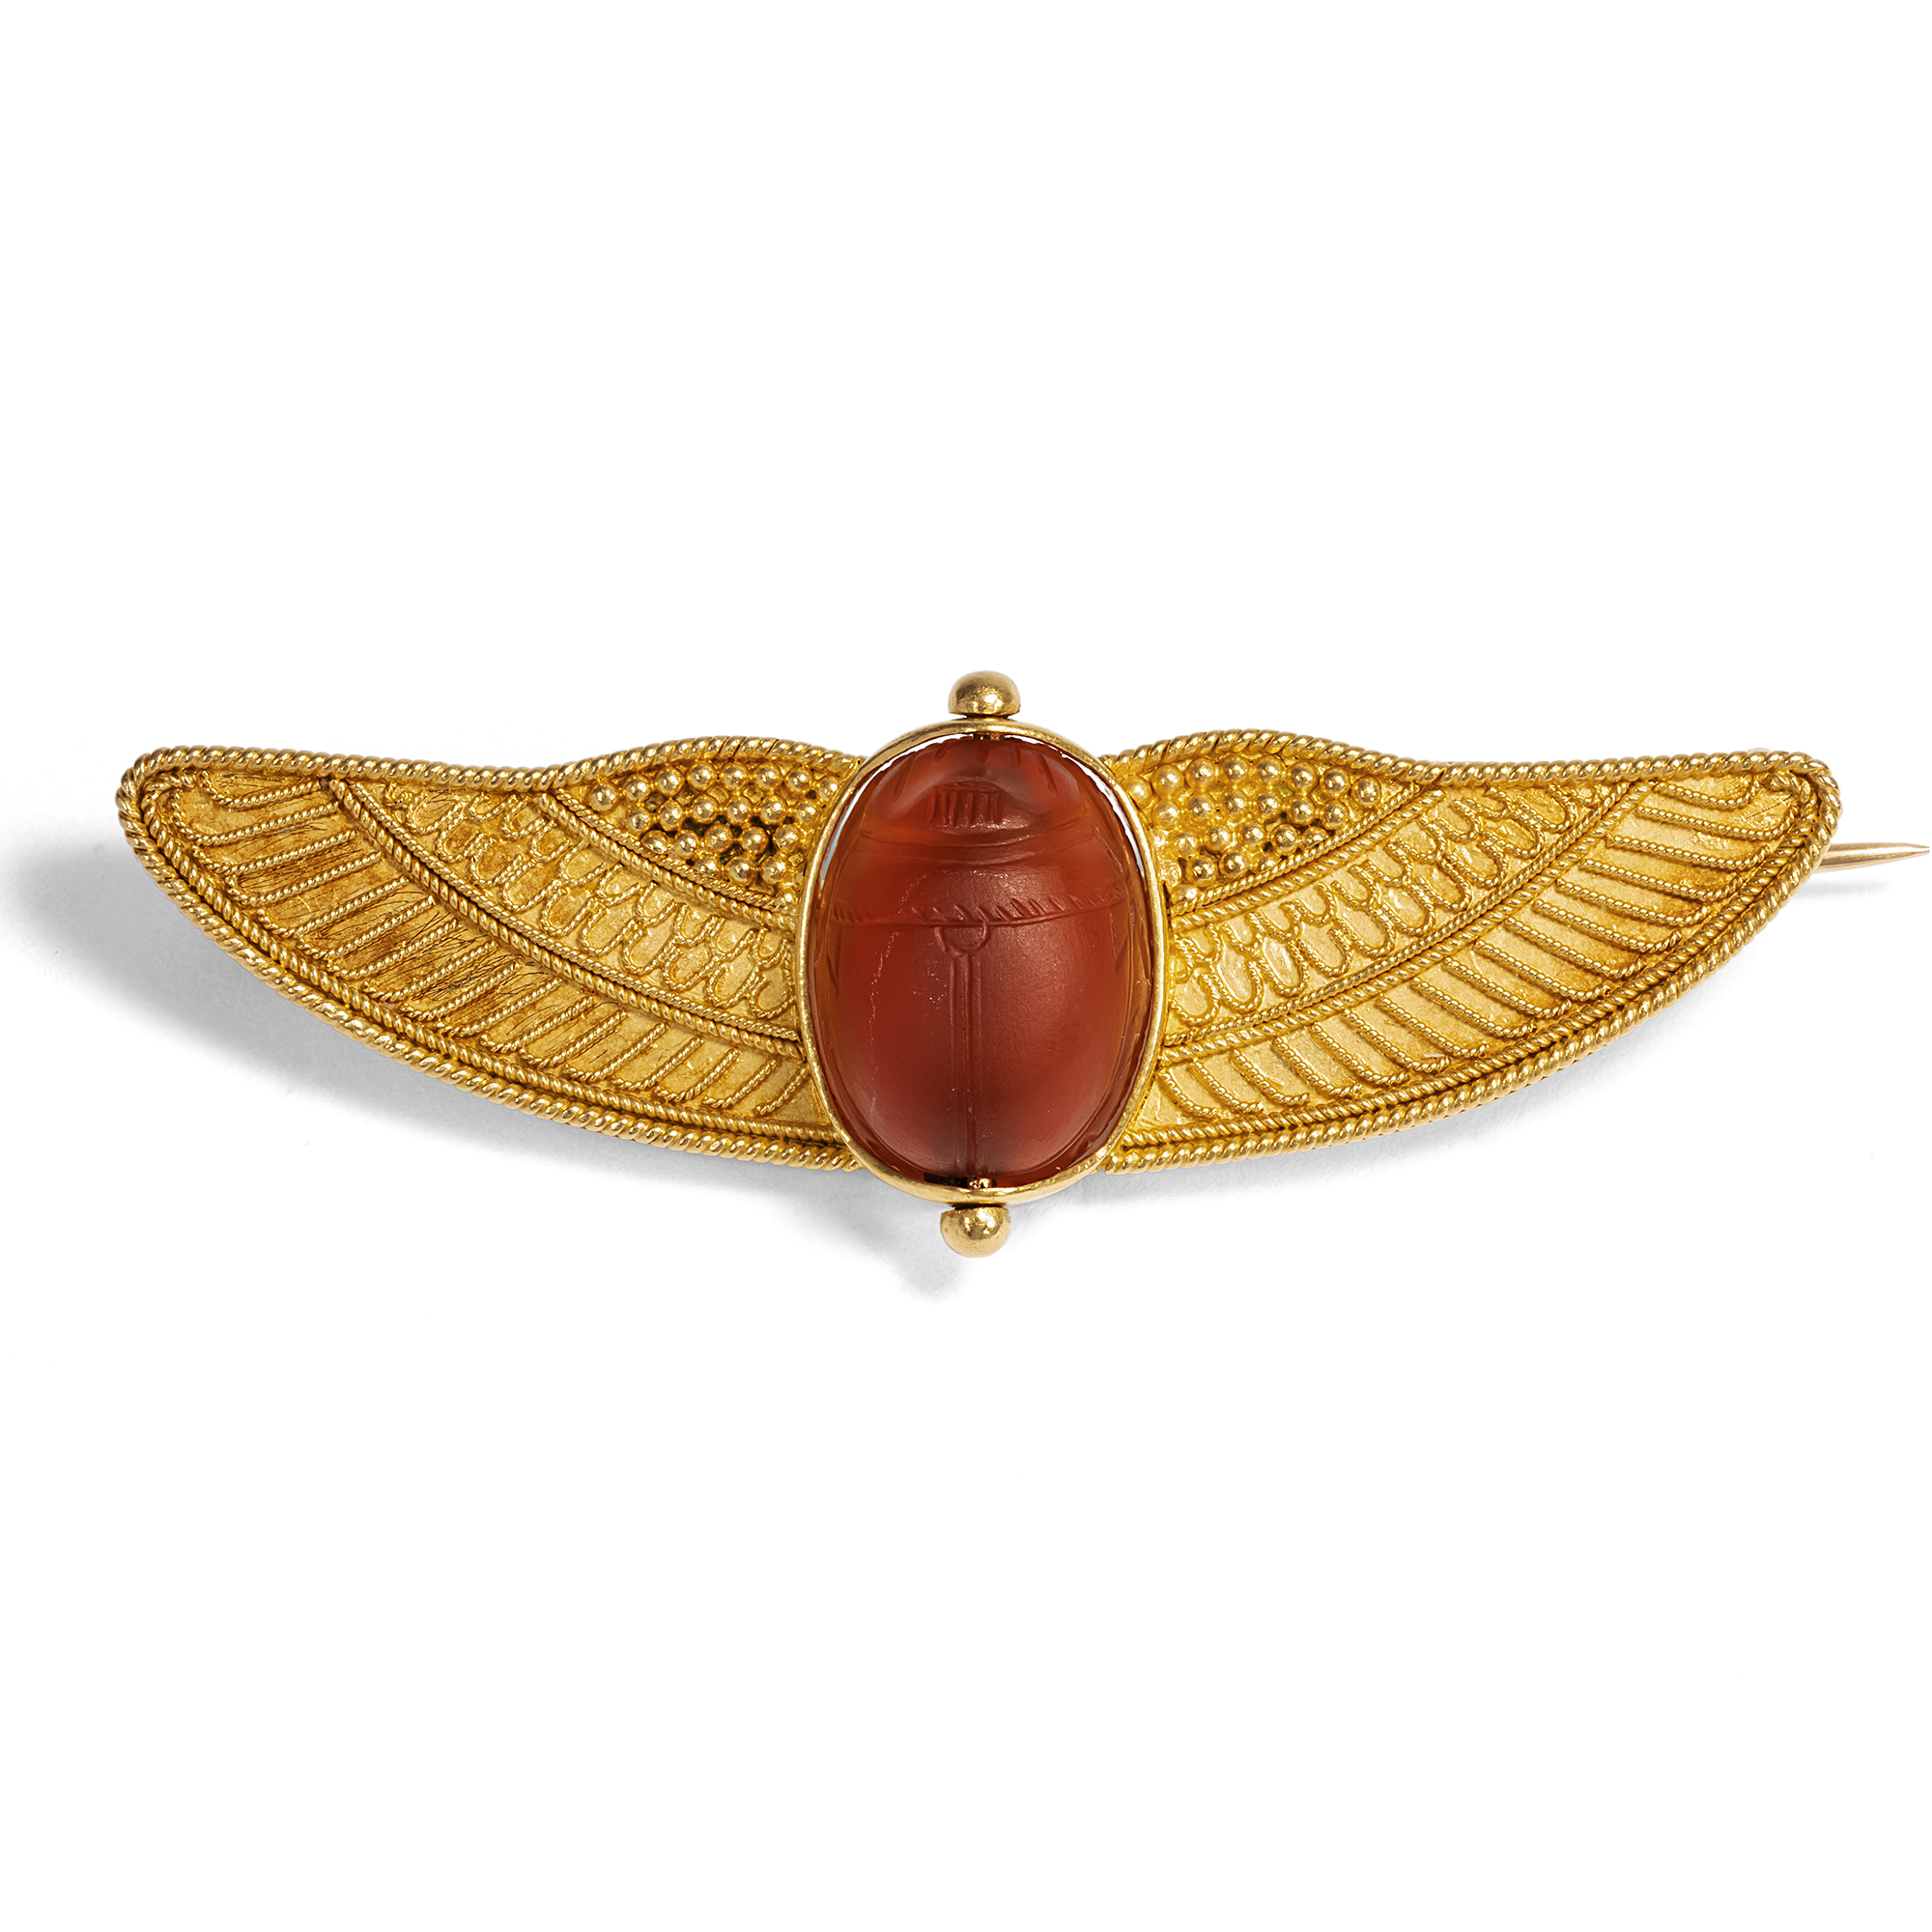 High Quality Brooch in Archaeological Style with Scarab in Gold, c. 1875